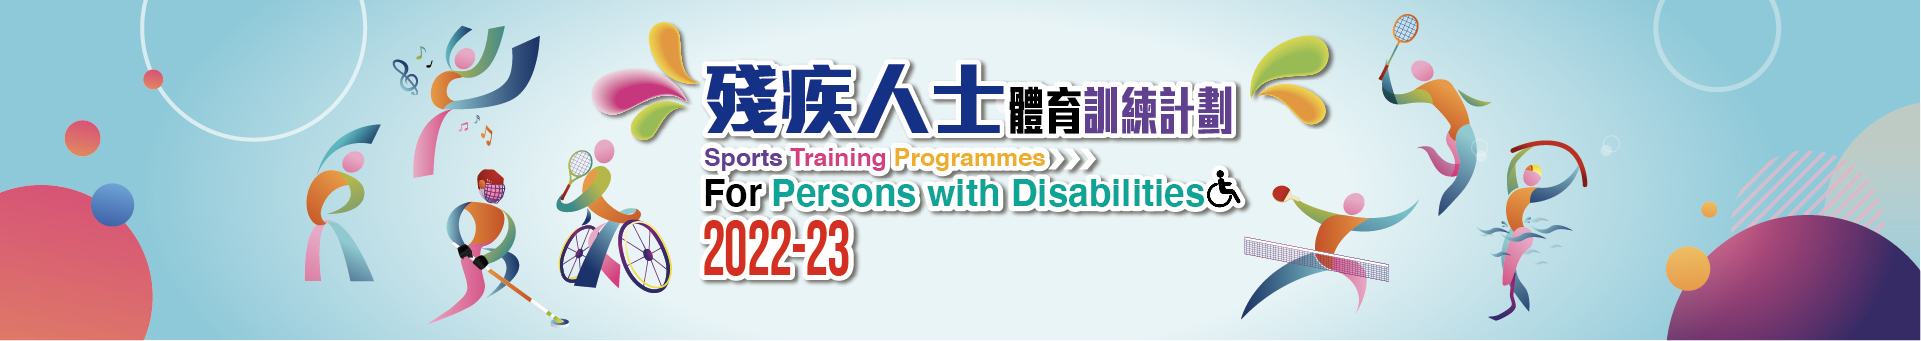 Sports Training Programmes for Persons with Disabilities 2022-23